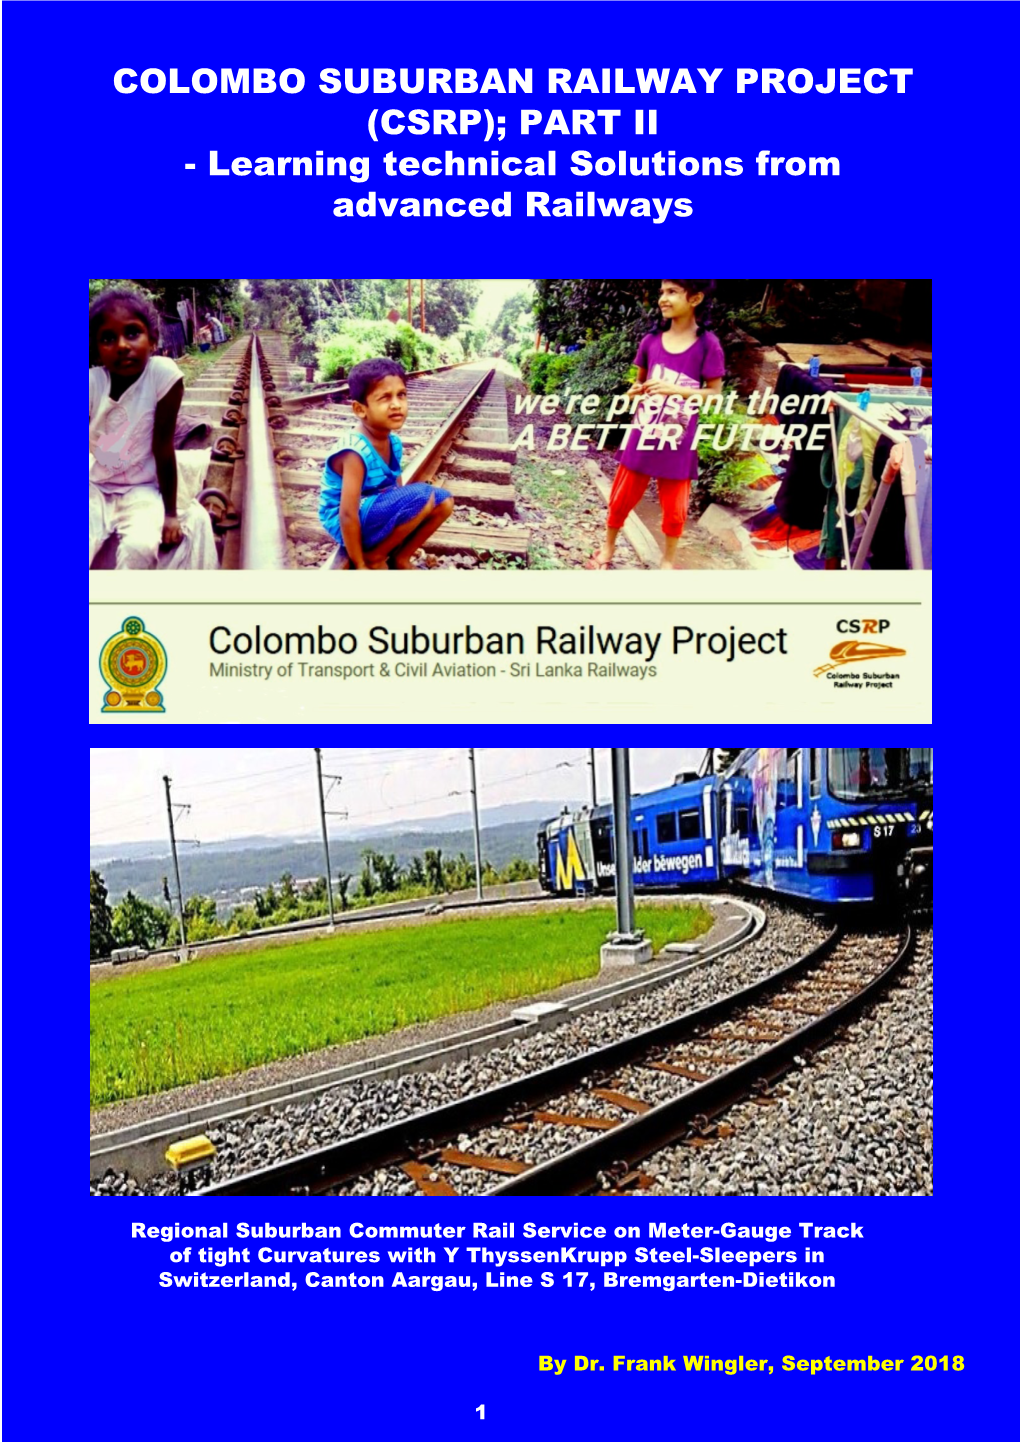 COLOMBO SUBURBAN RAILWAY PROJECT (CSRP); PART II - Learning Technical Solutions from Advanced Railways